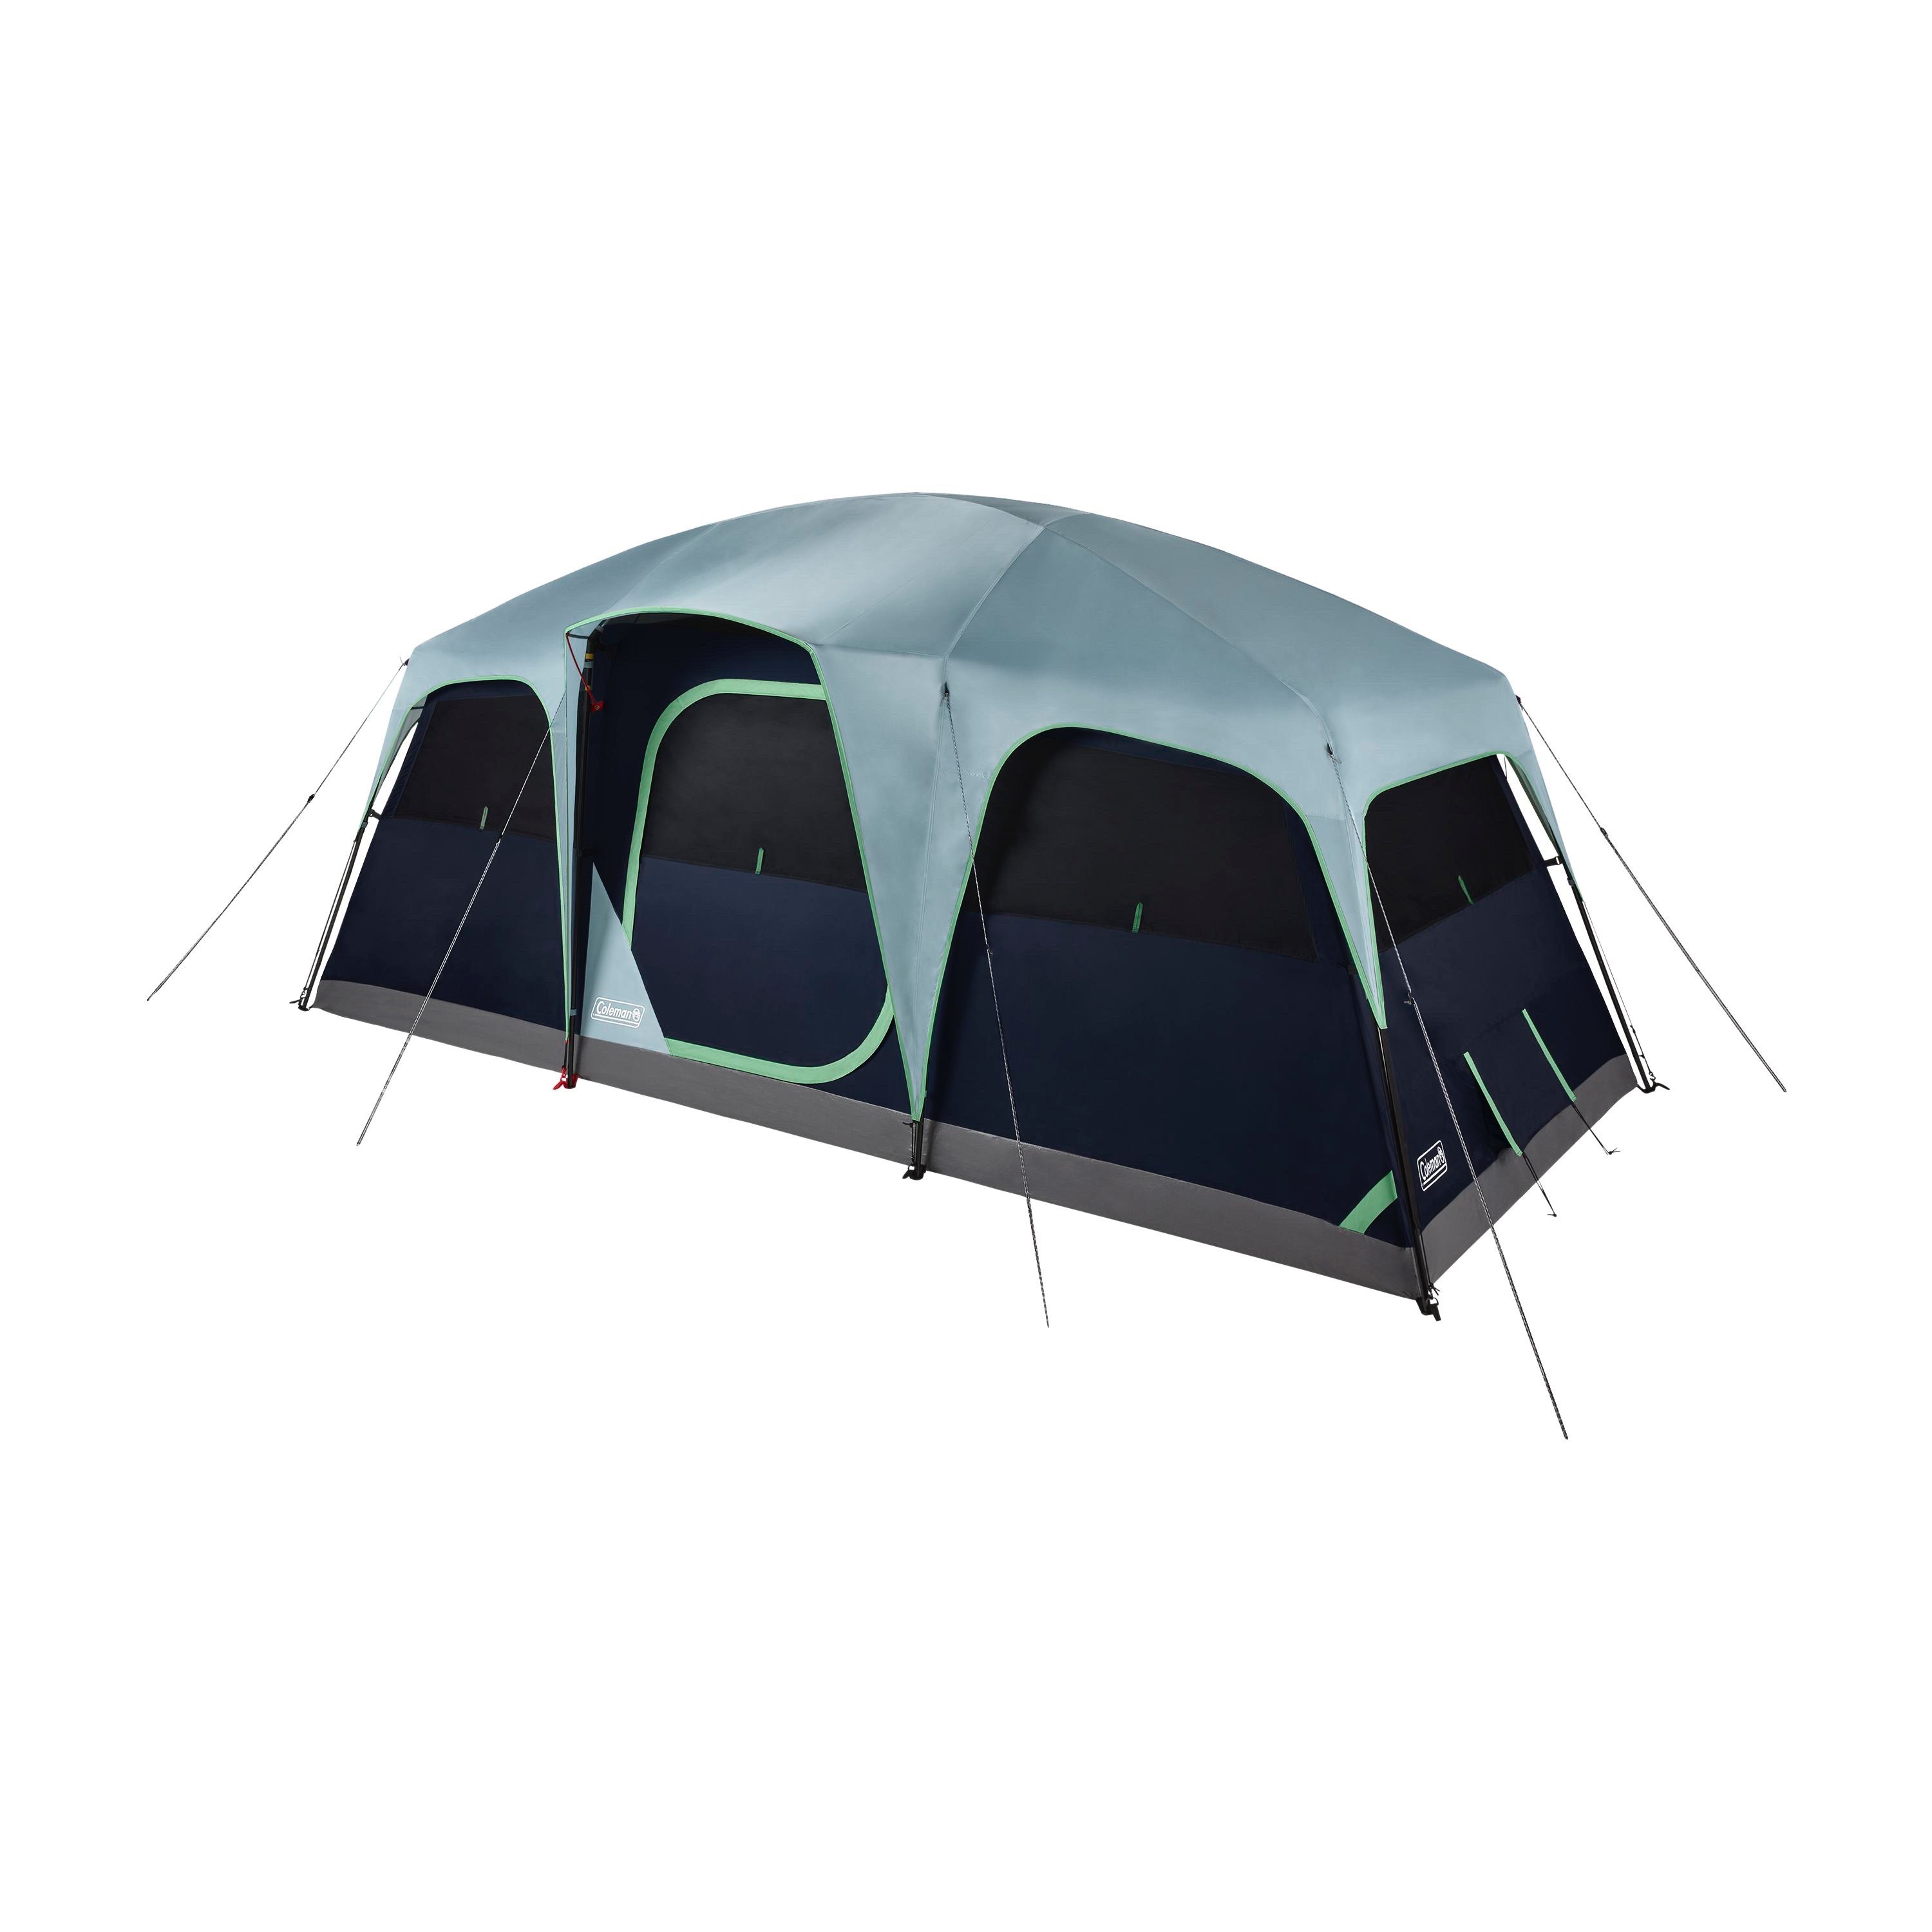 Coleman Sunlodge 8-Person Camping Tent, Blue Nights - image 1 of 9